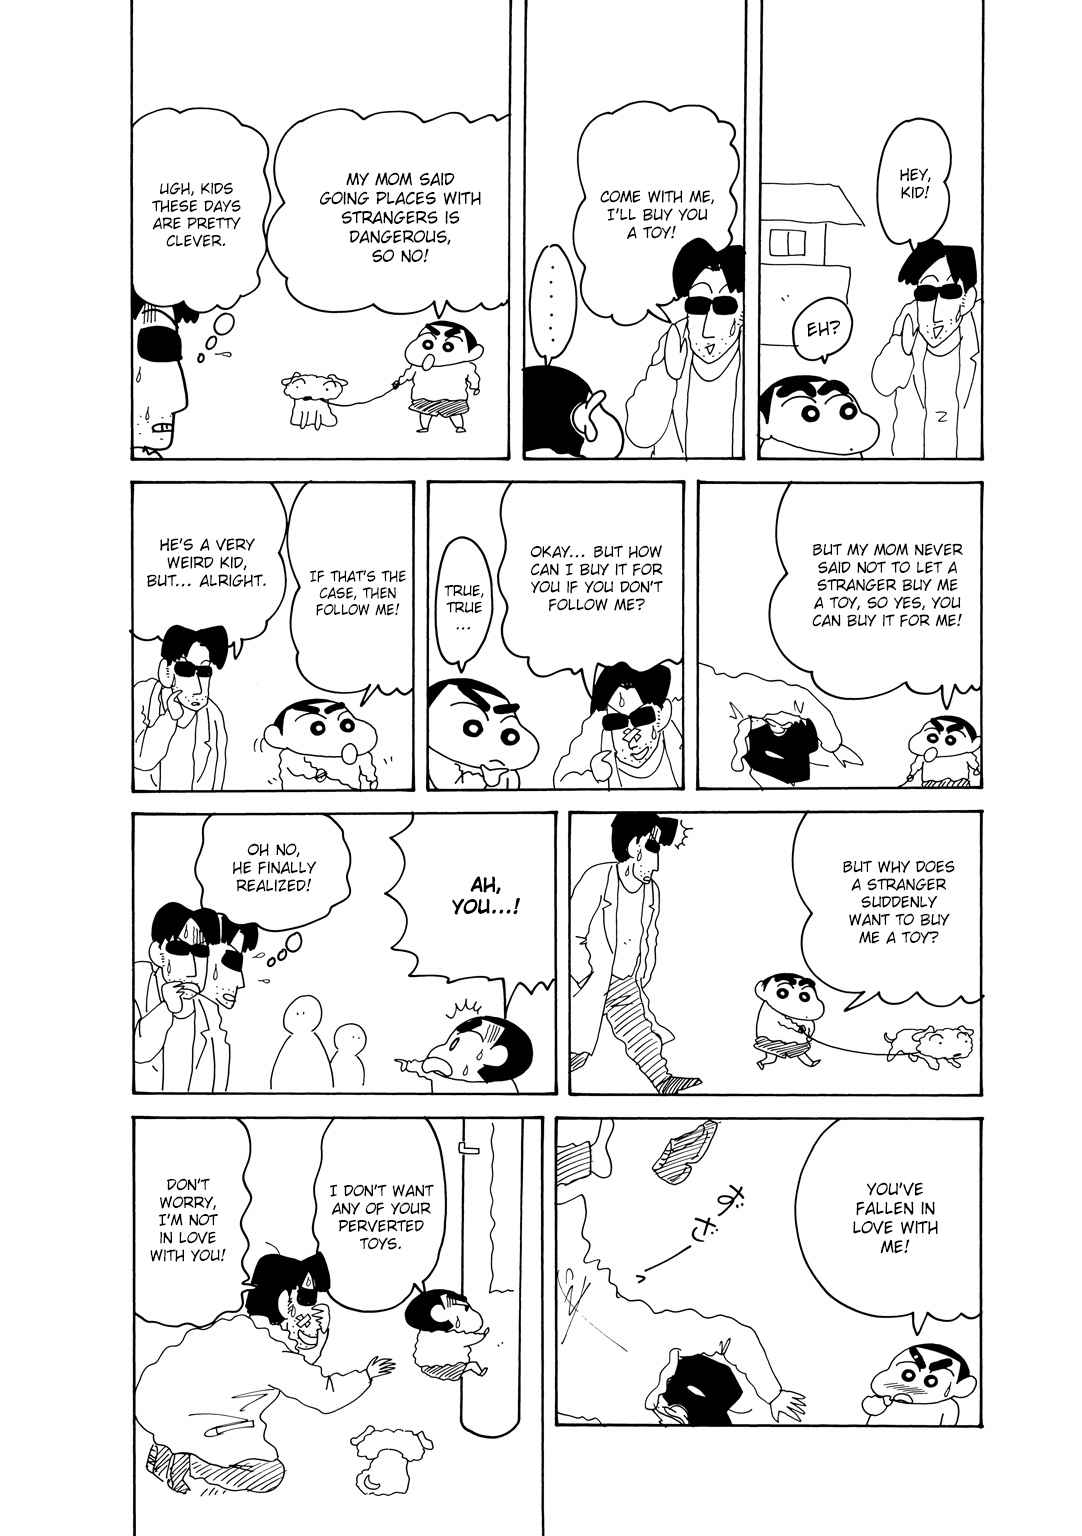 Crayon Shin chan Vol. 15 Ch. 6.3 Part 03 Dad's Cheating! A Love Letter Has Been Found